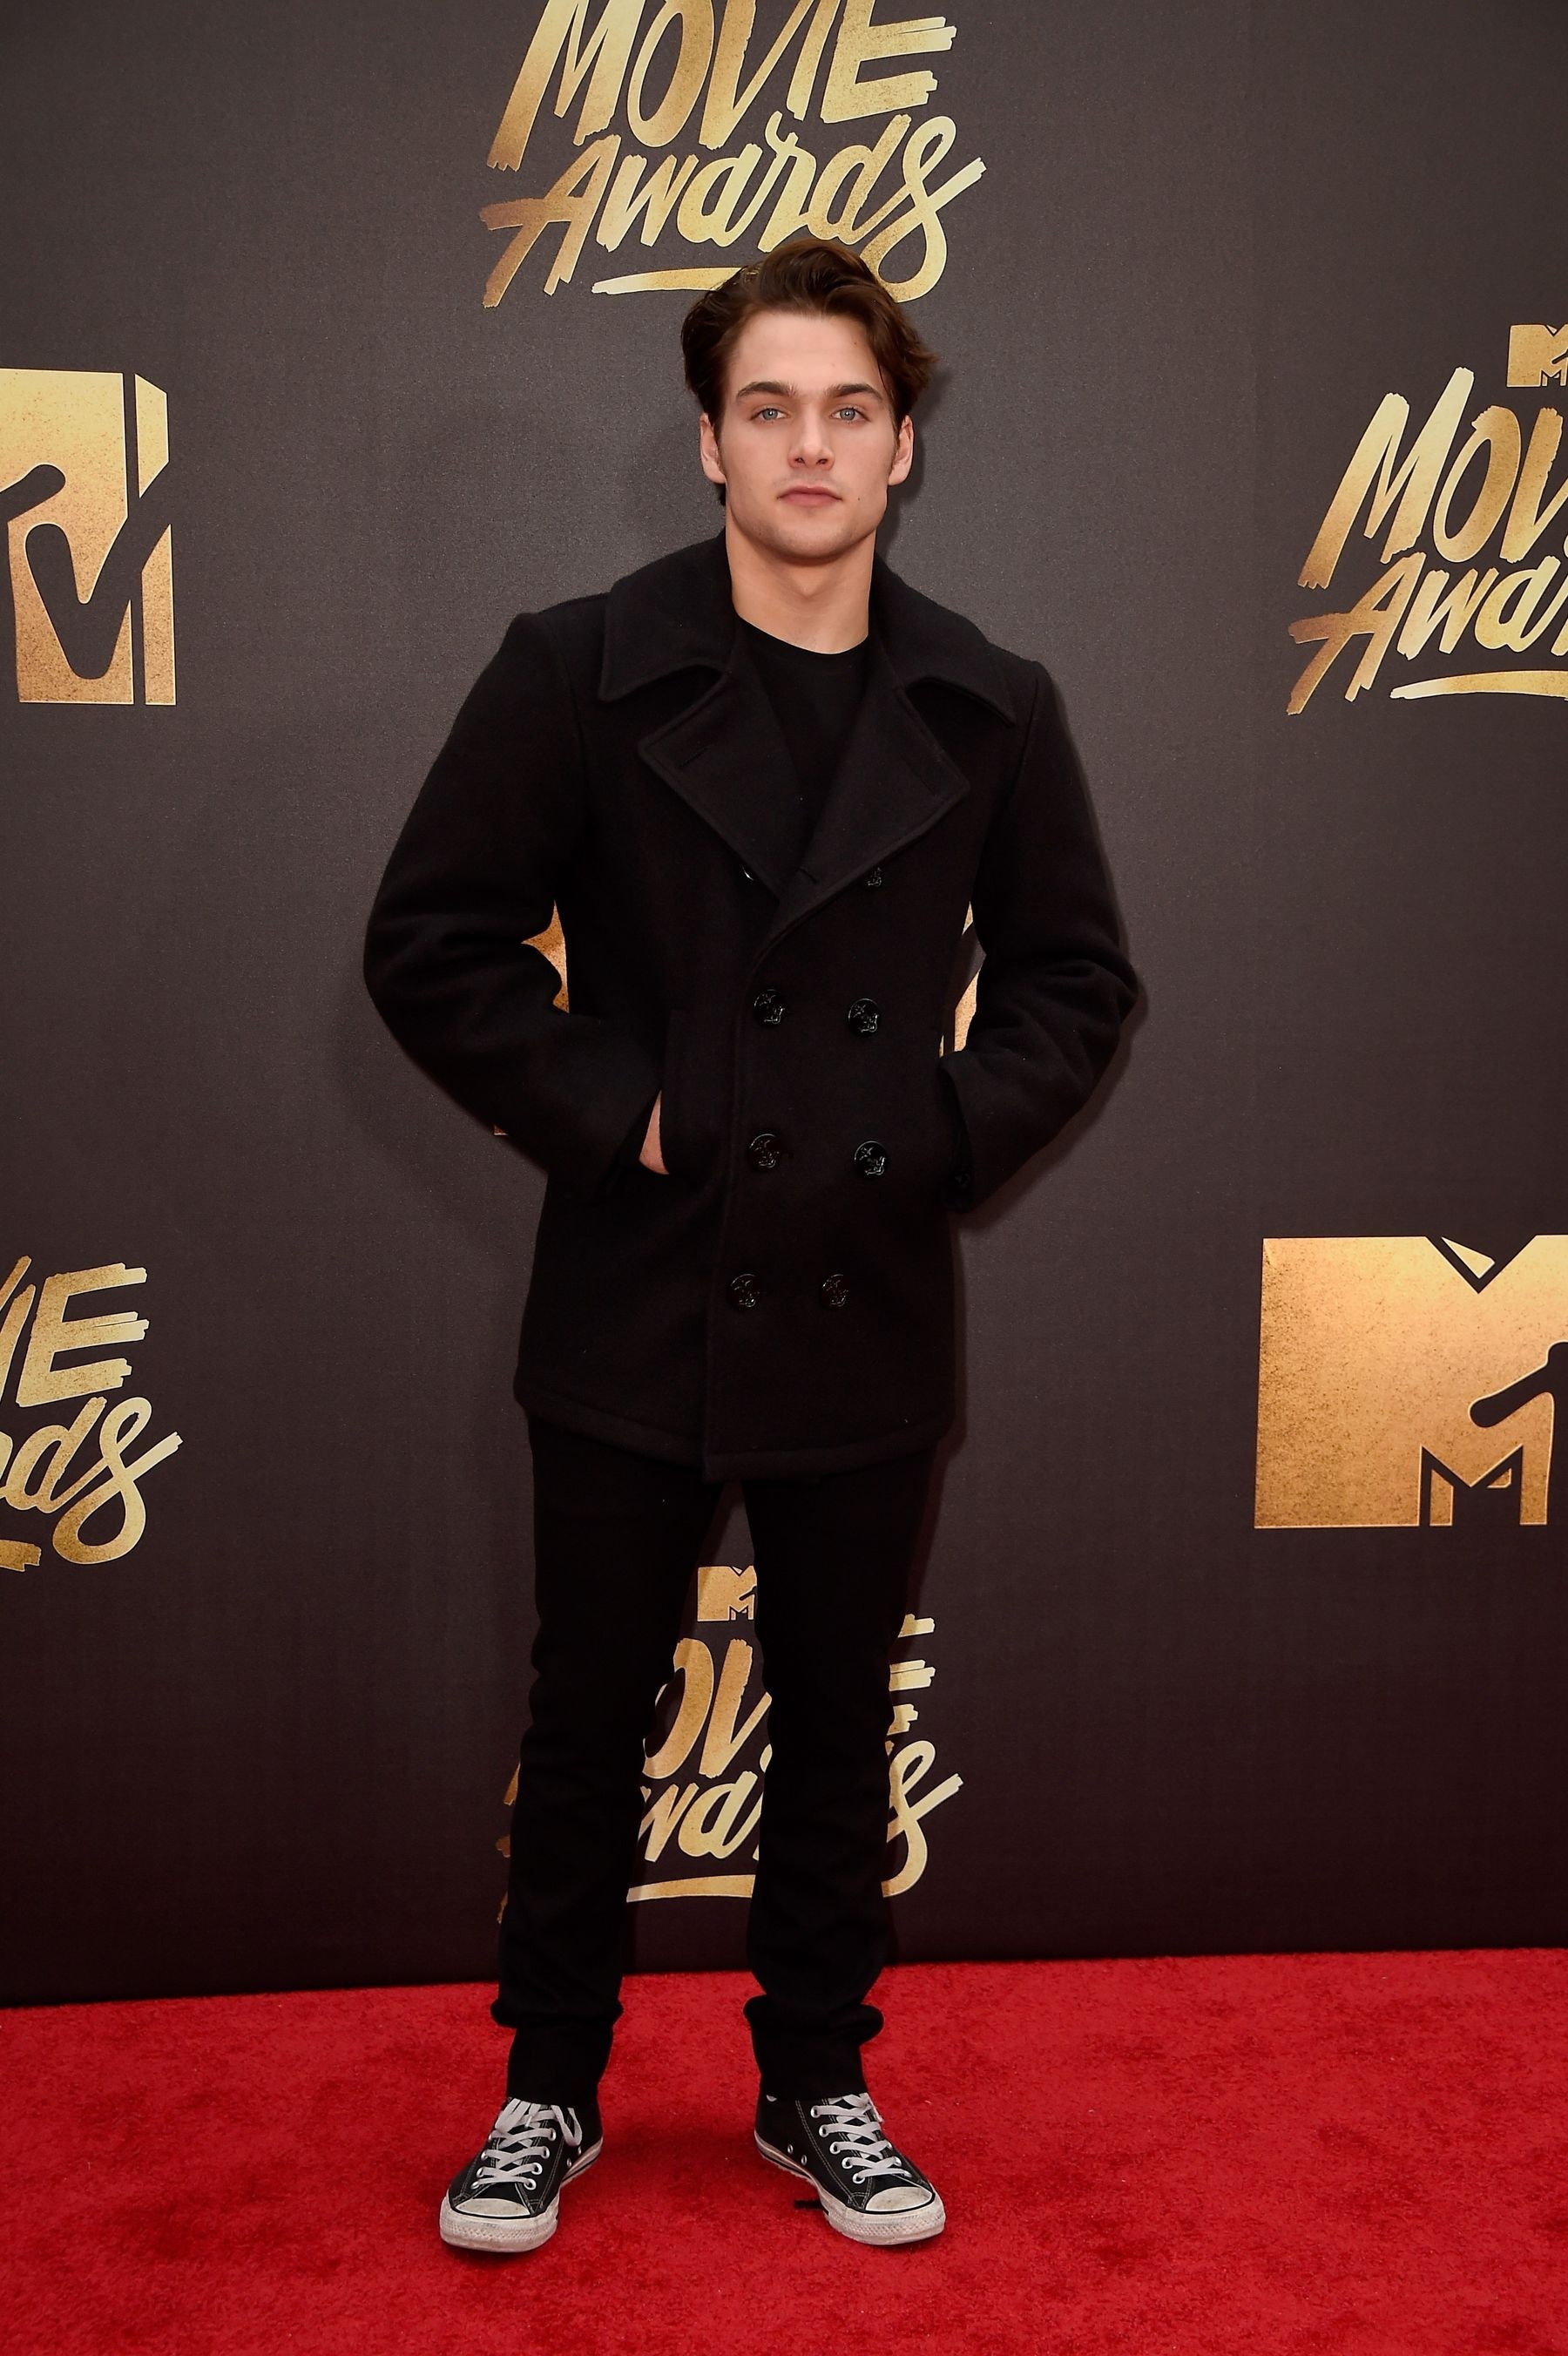 Team players mtv, stars represented movie, awards red carpet, movie awards dylan, 1800x2710 HD Phone